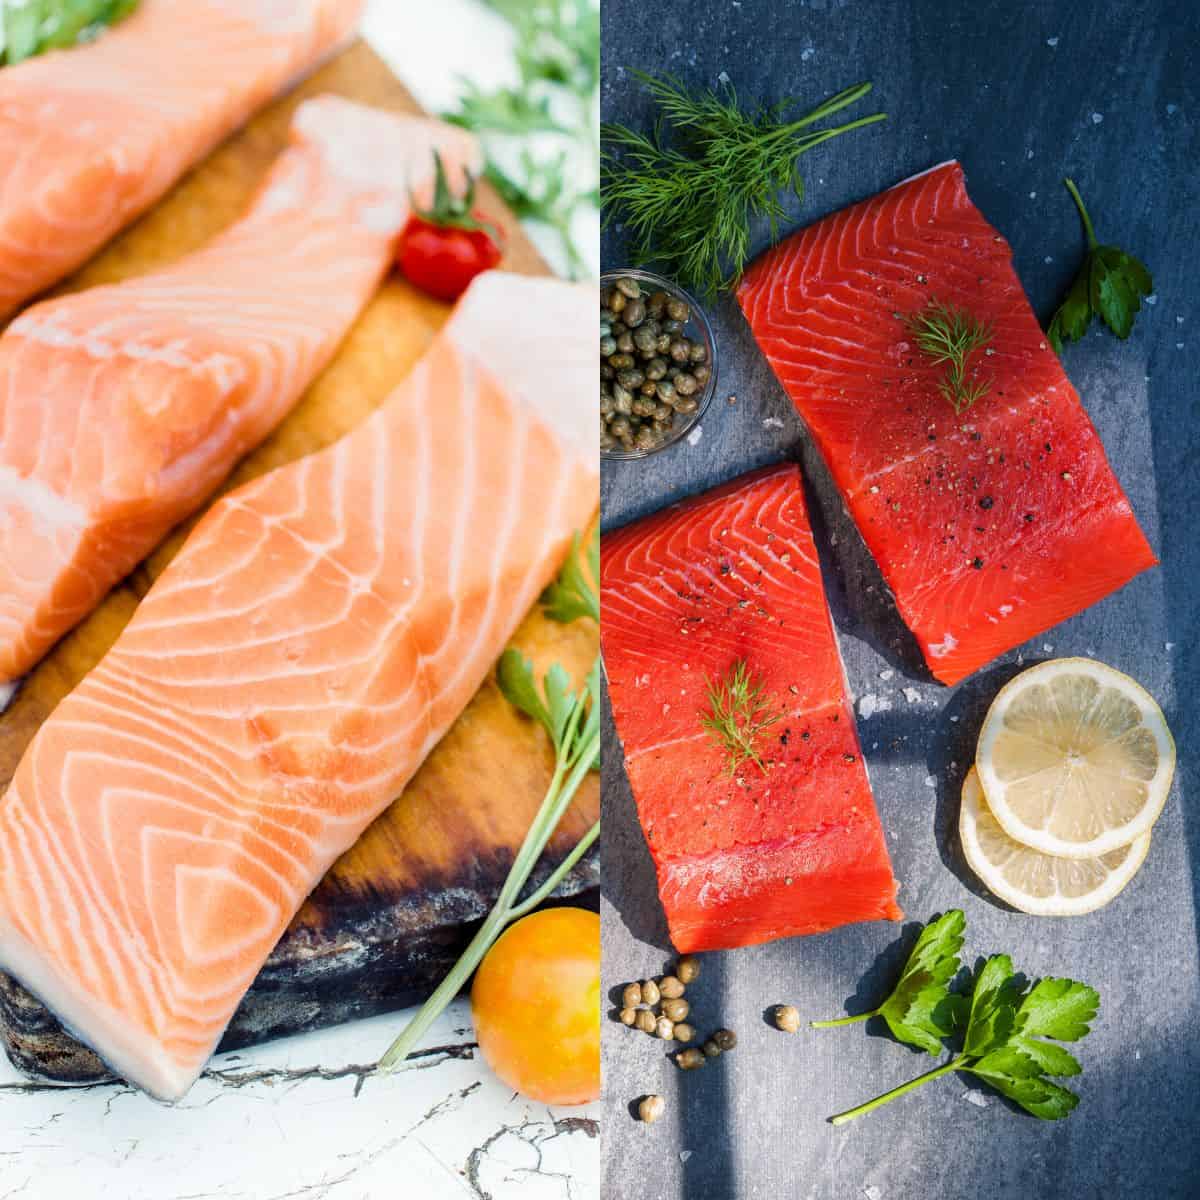 a side-by-side photo comparison of a light pale pink salmon fillet set with wide stripes and on the right is a very dark pink almost red with stripes close together. Clearly you can see the difference in quality by the vibrancy of the meat, making wild-caught the better option.